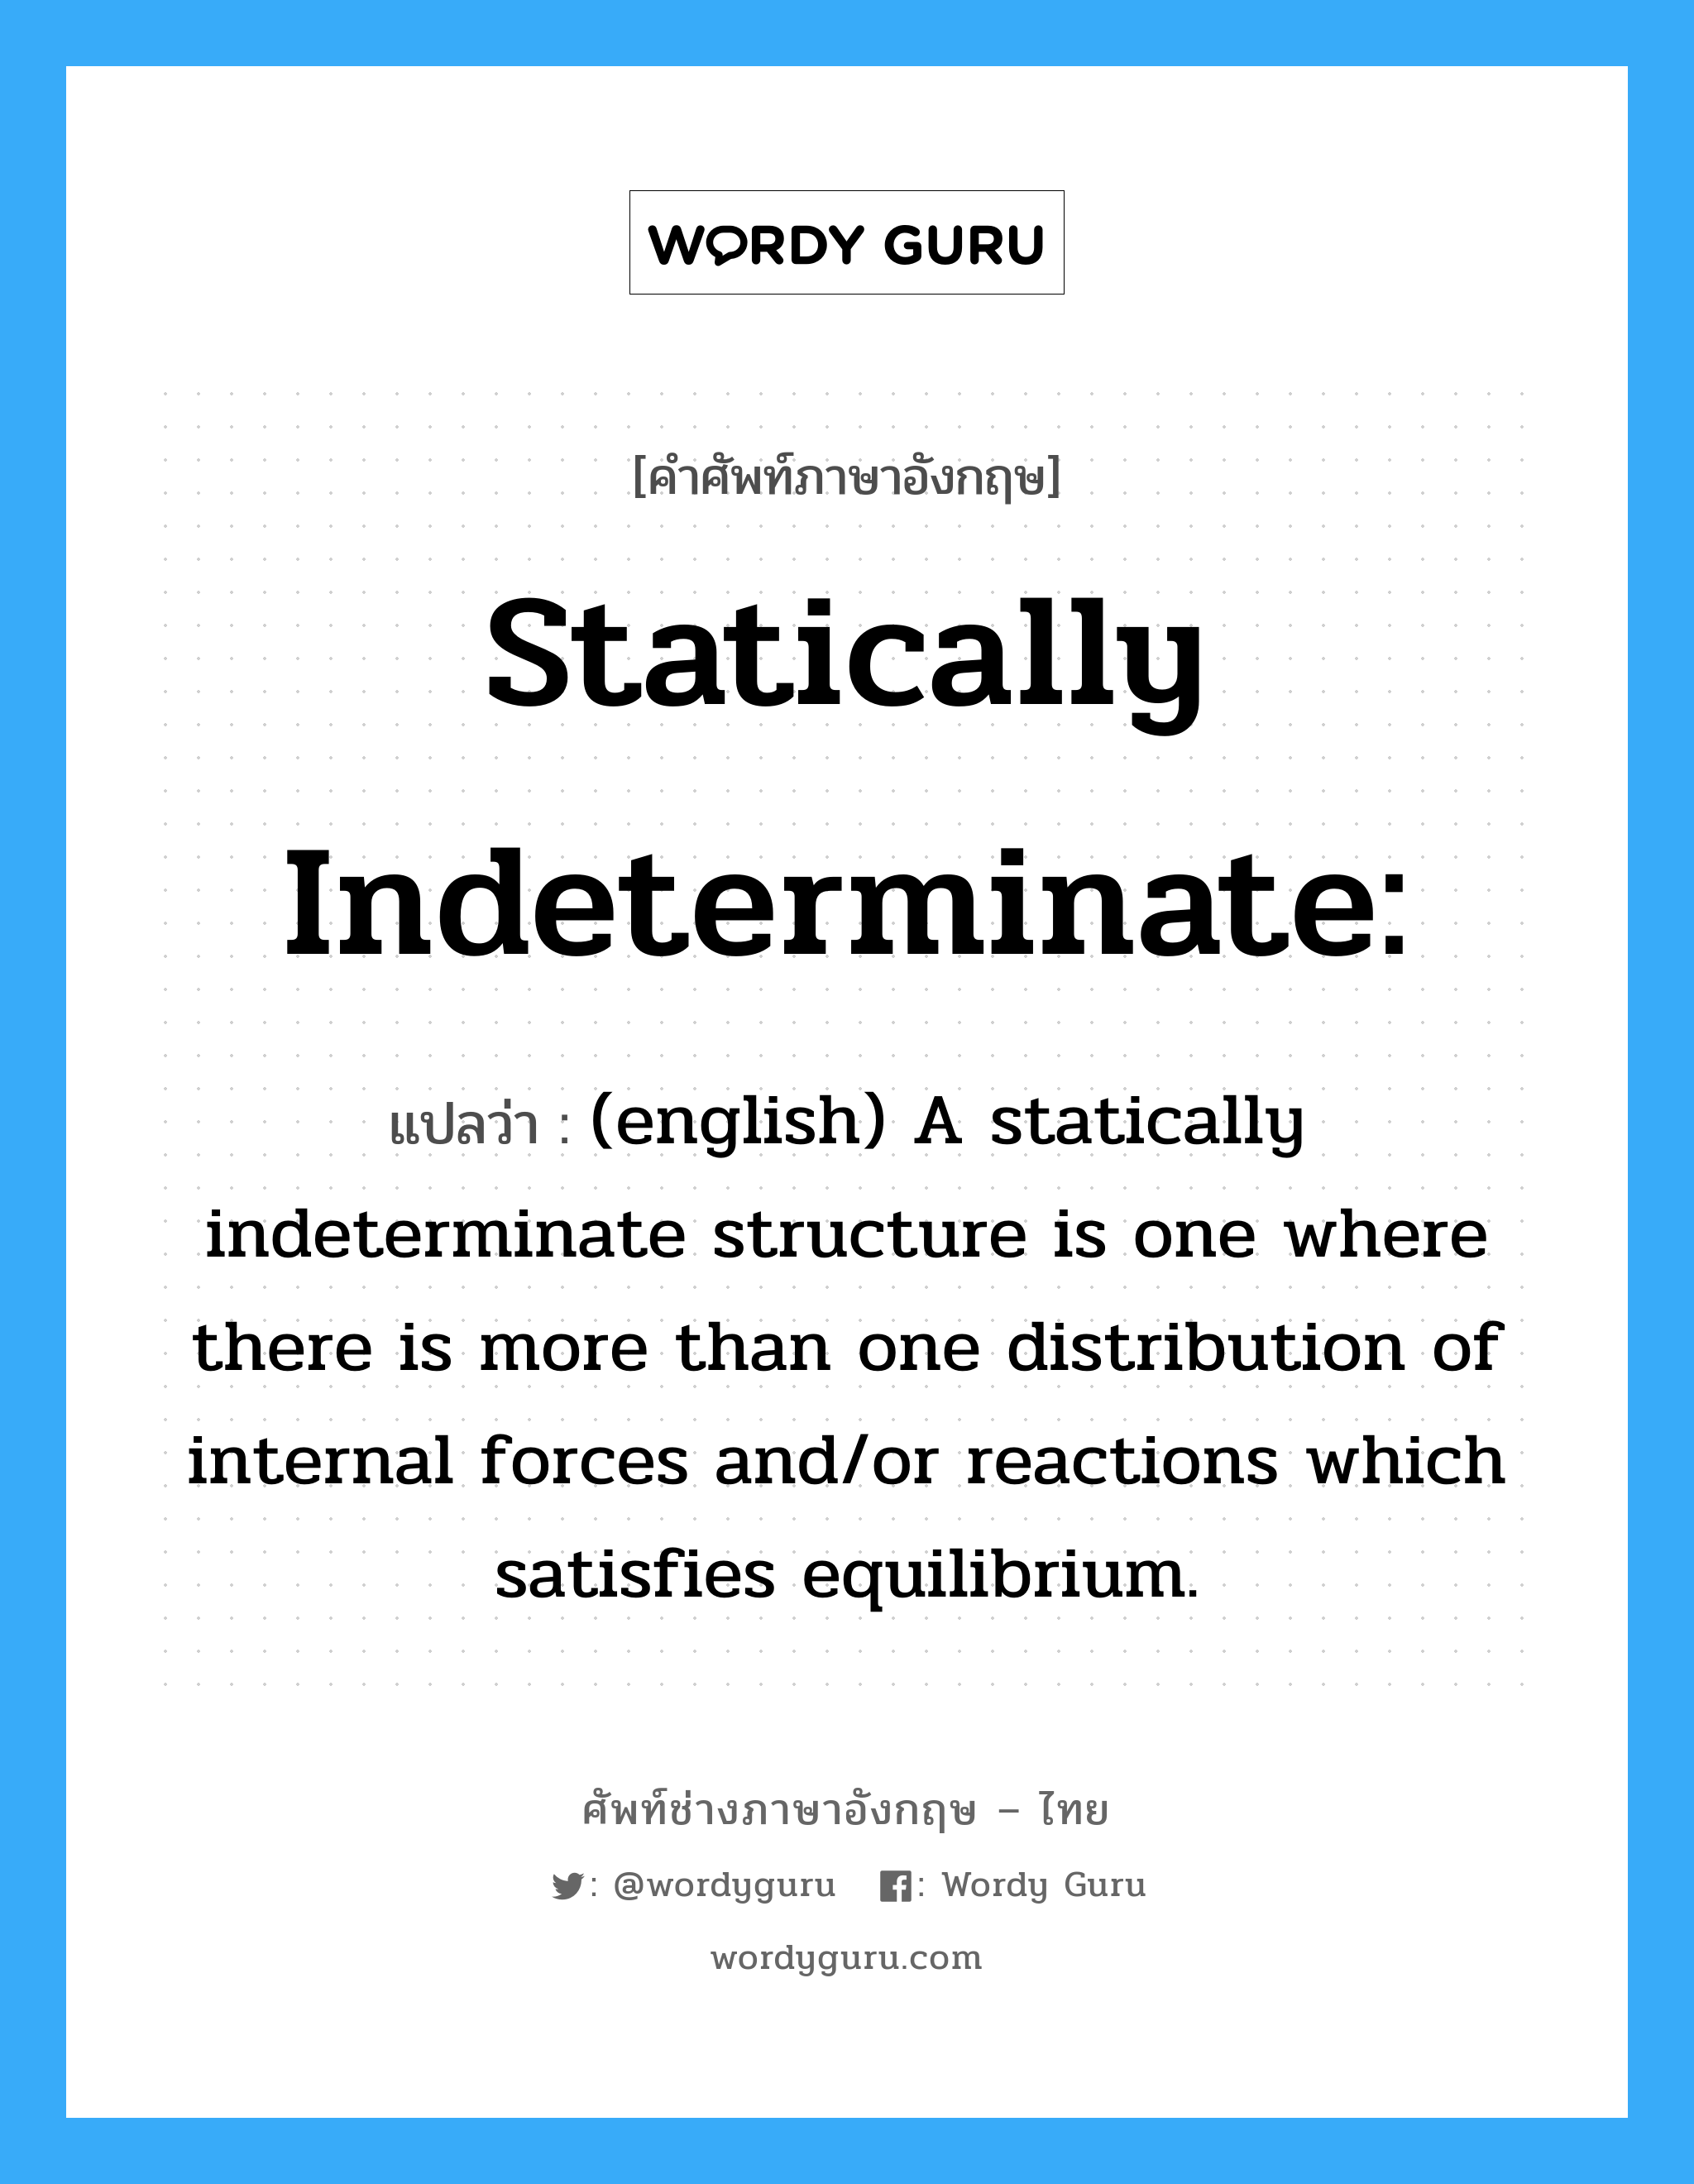 Statically indeterminate: แปลว่า?, คำศัพท์ช่างภาษาอังกฤษ - ไทย Statically indeterminate: คำศัพท์ภาษาอังกฤษ Statically indeterminate: แปลว่า (english) A statically indeterminate structure is one where there is more than one distribution of internal forces and/or reactions which satisfies equilibrium.